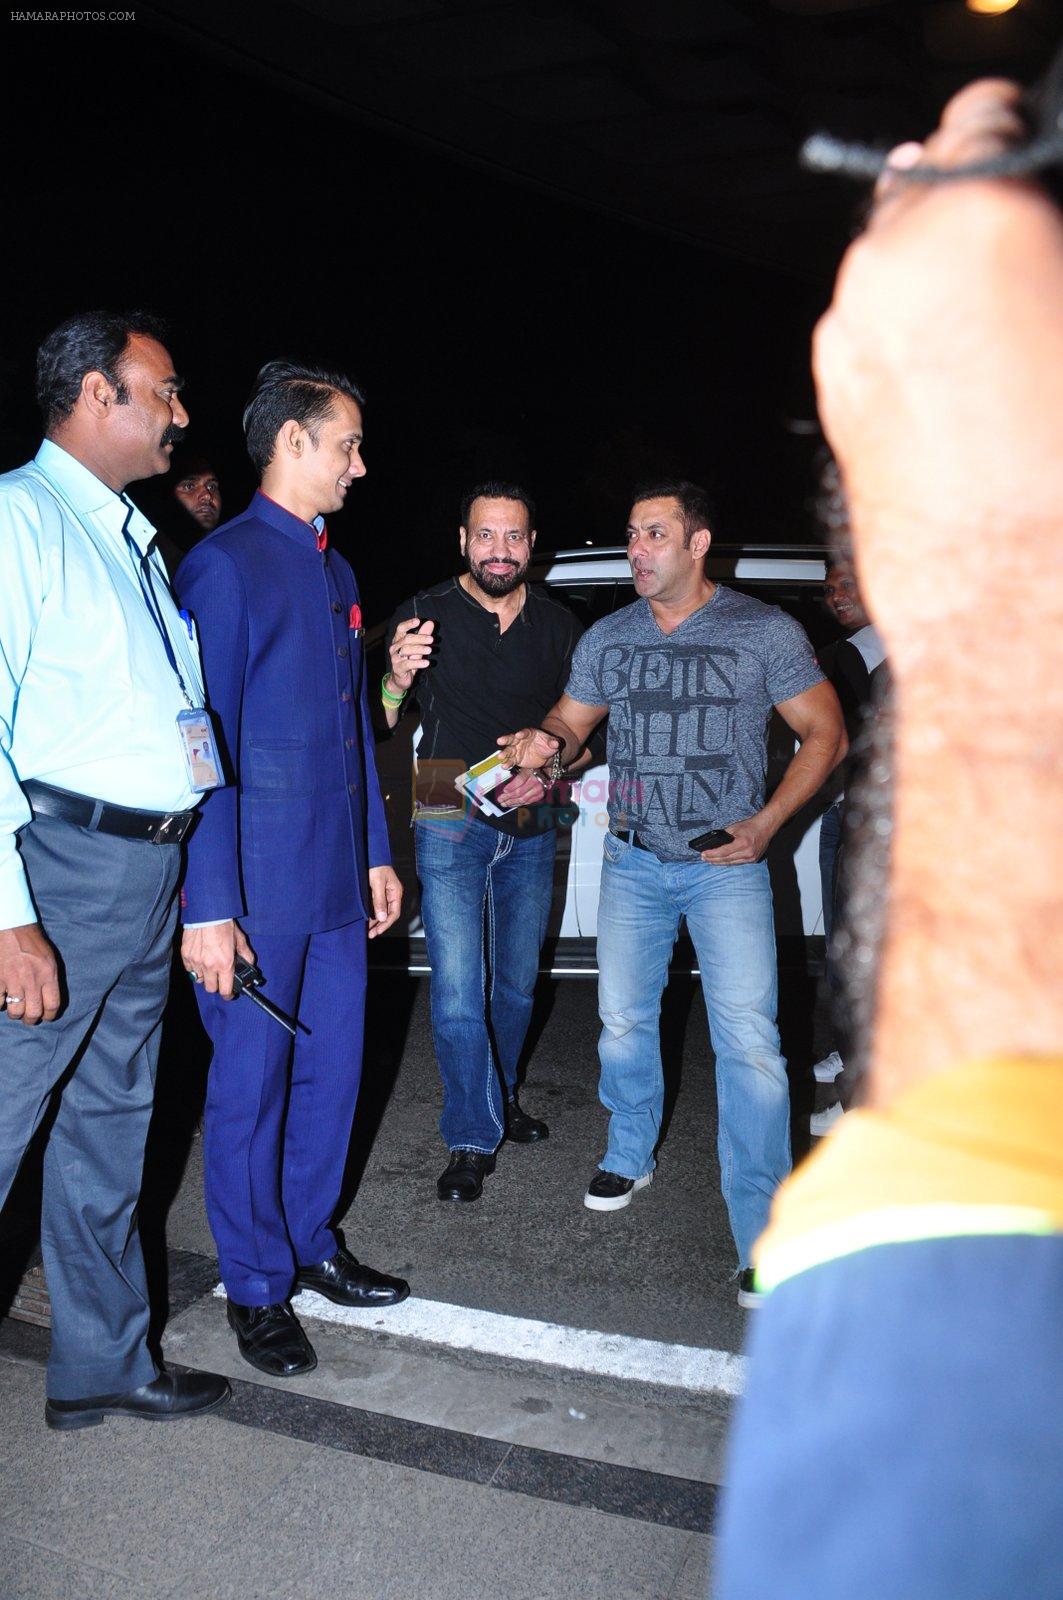 Salman Khan snapped at airport on 17th March 2016